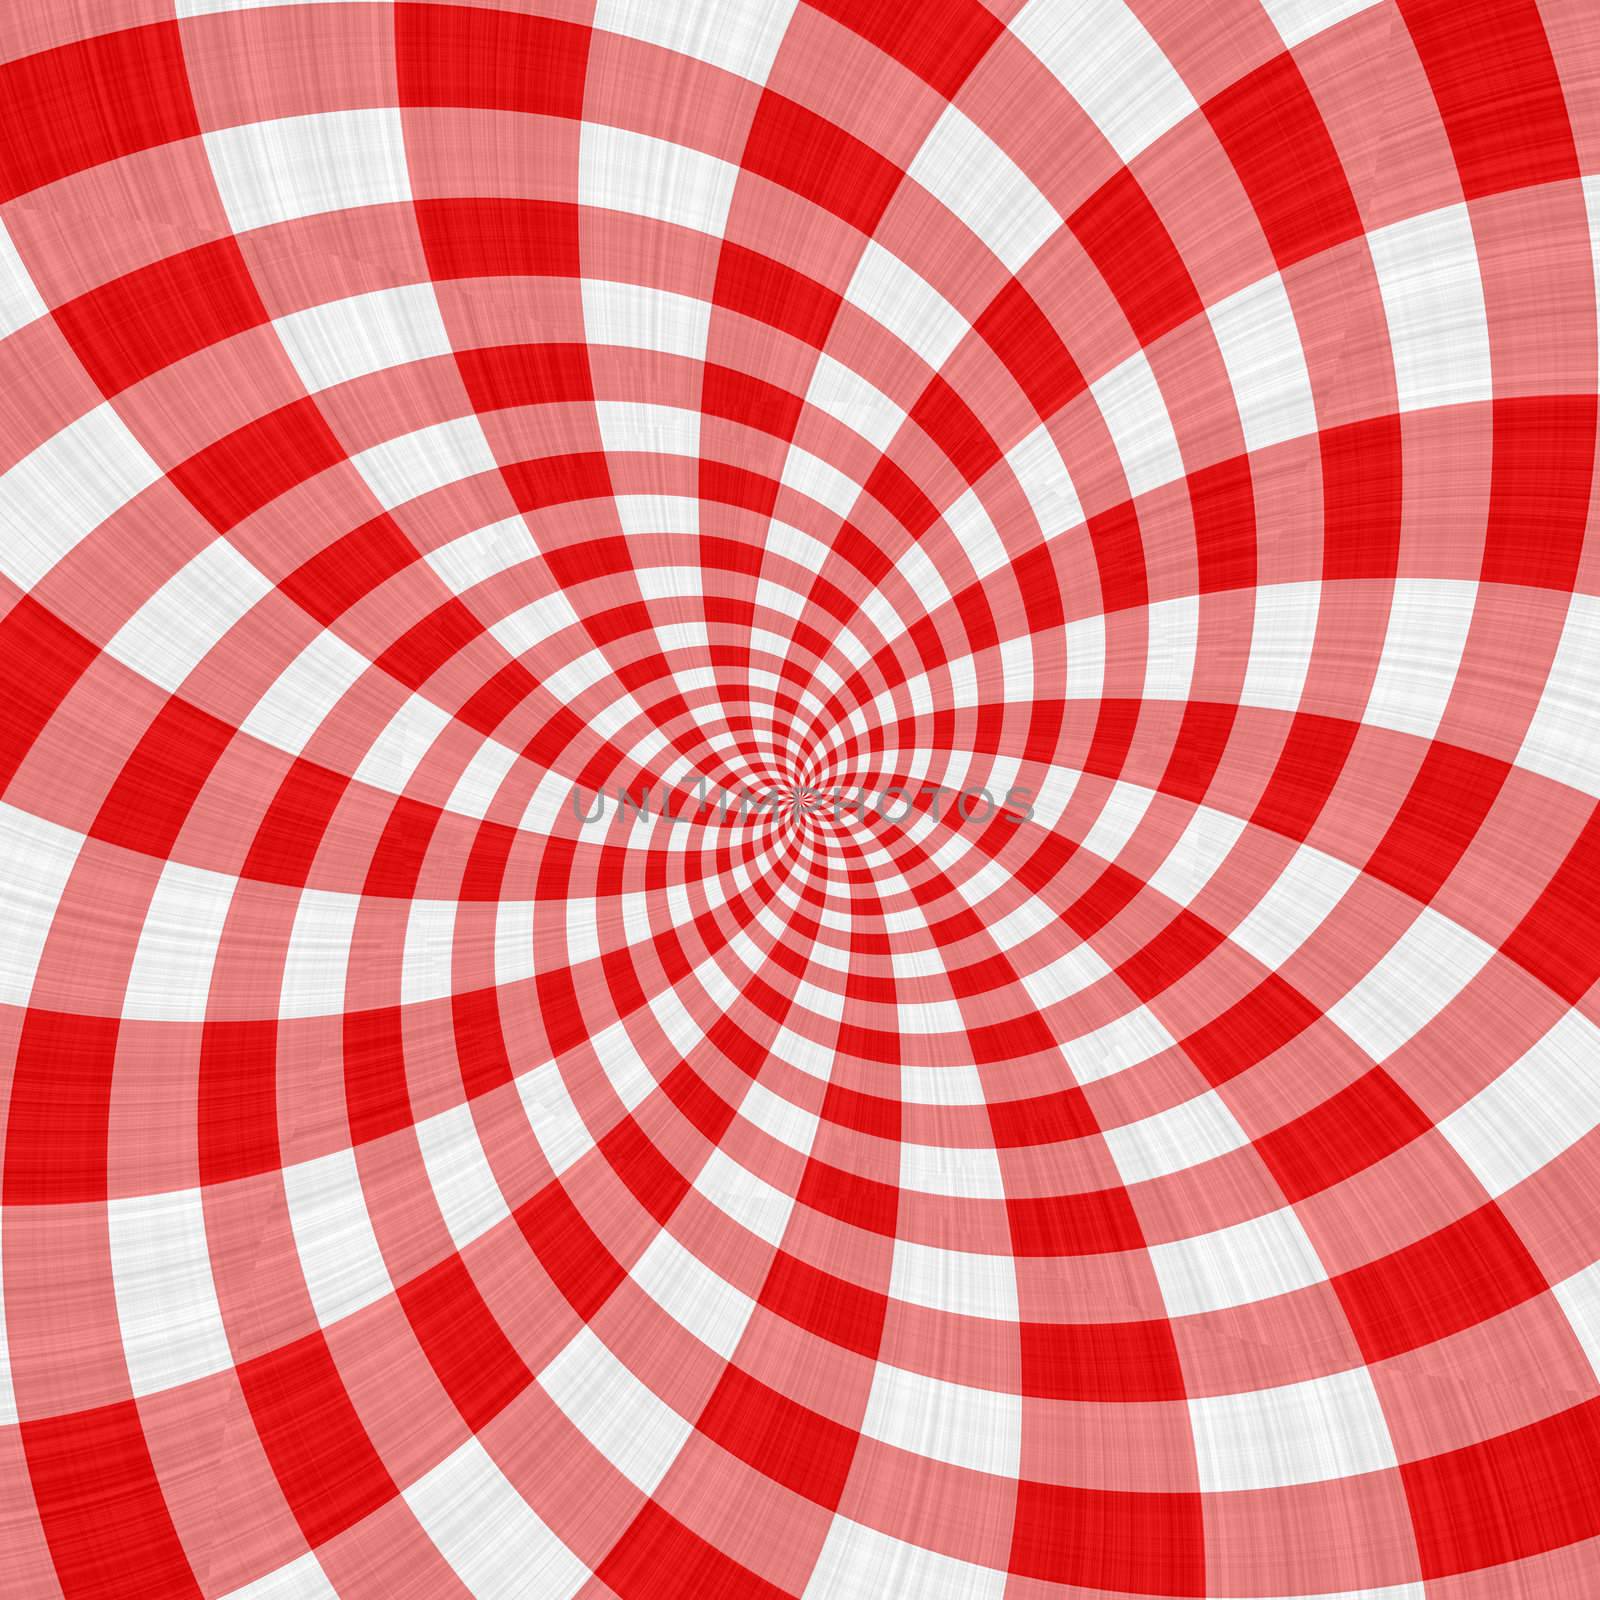 texture of swirling repeating red and white blocks